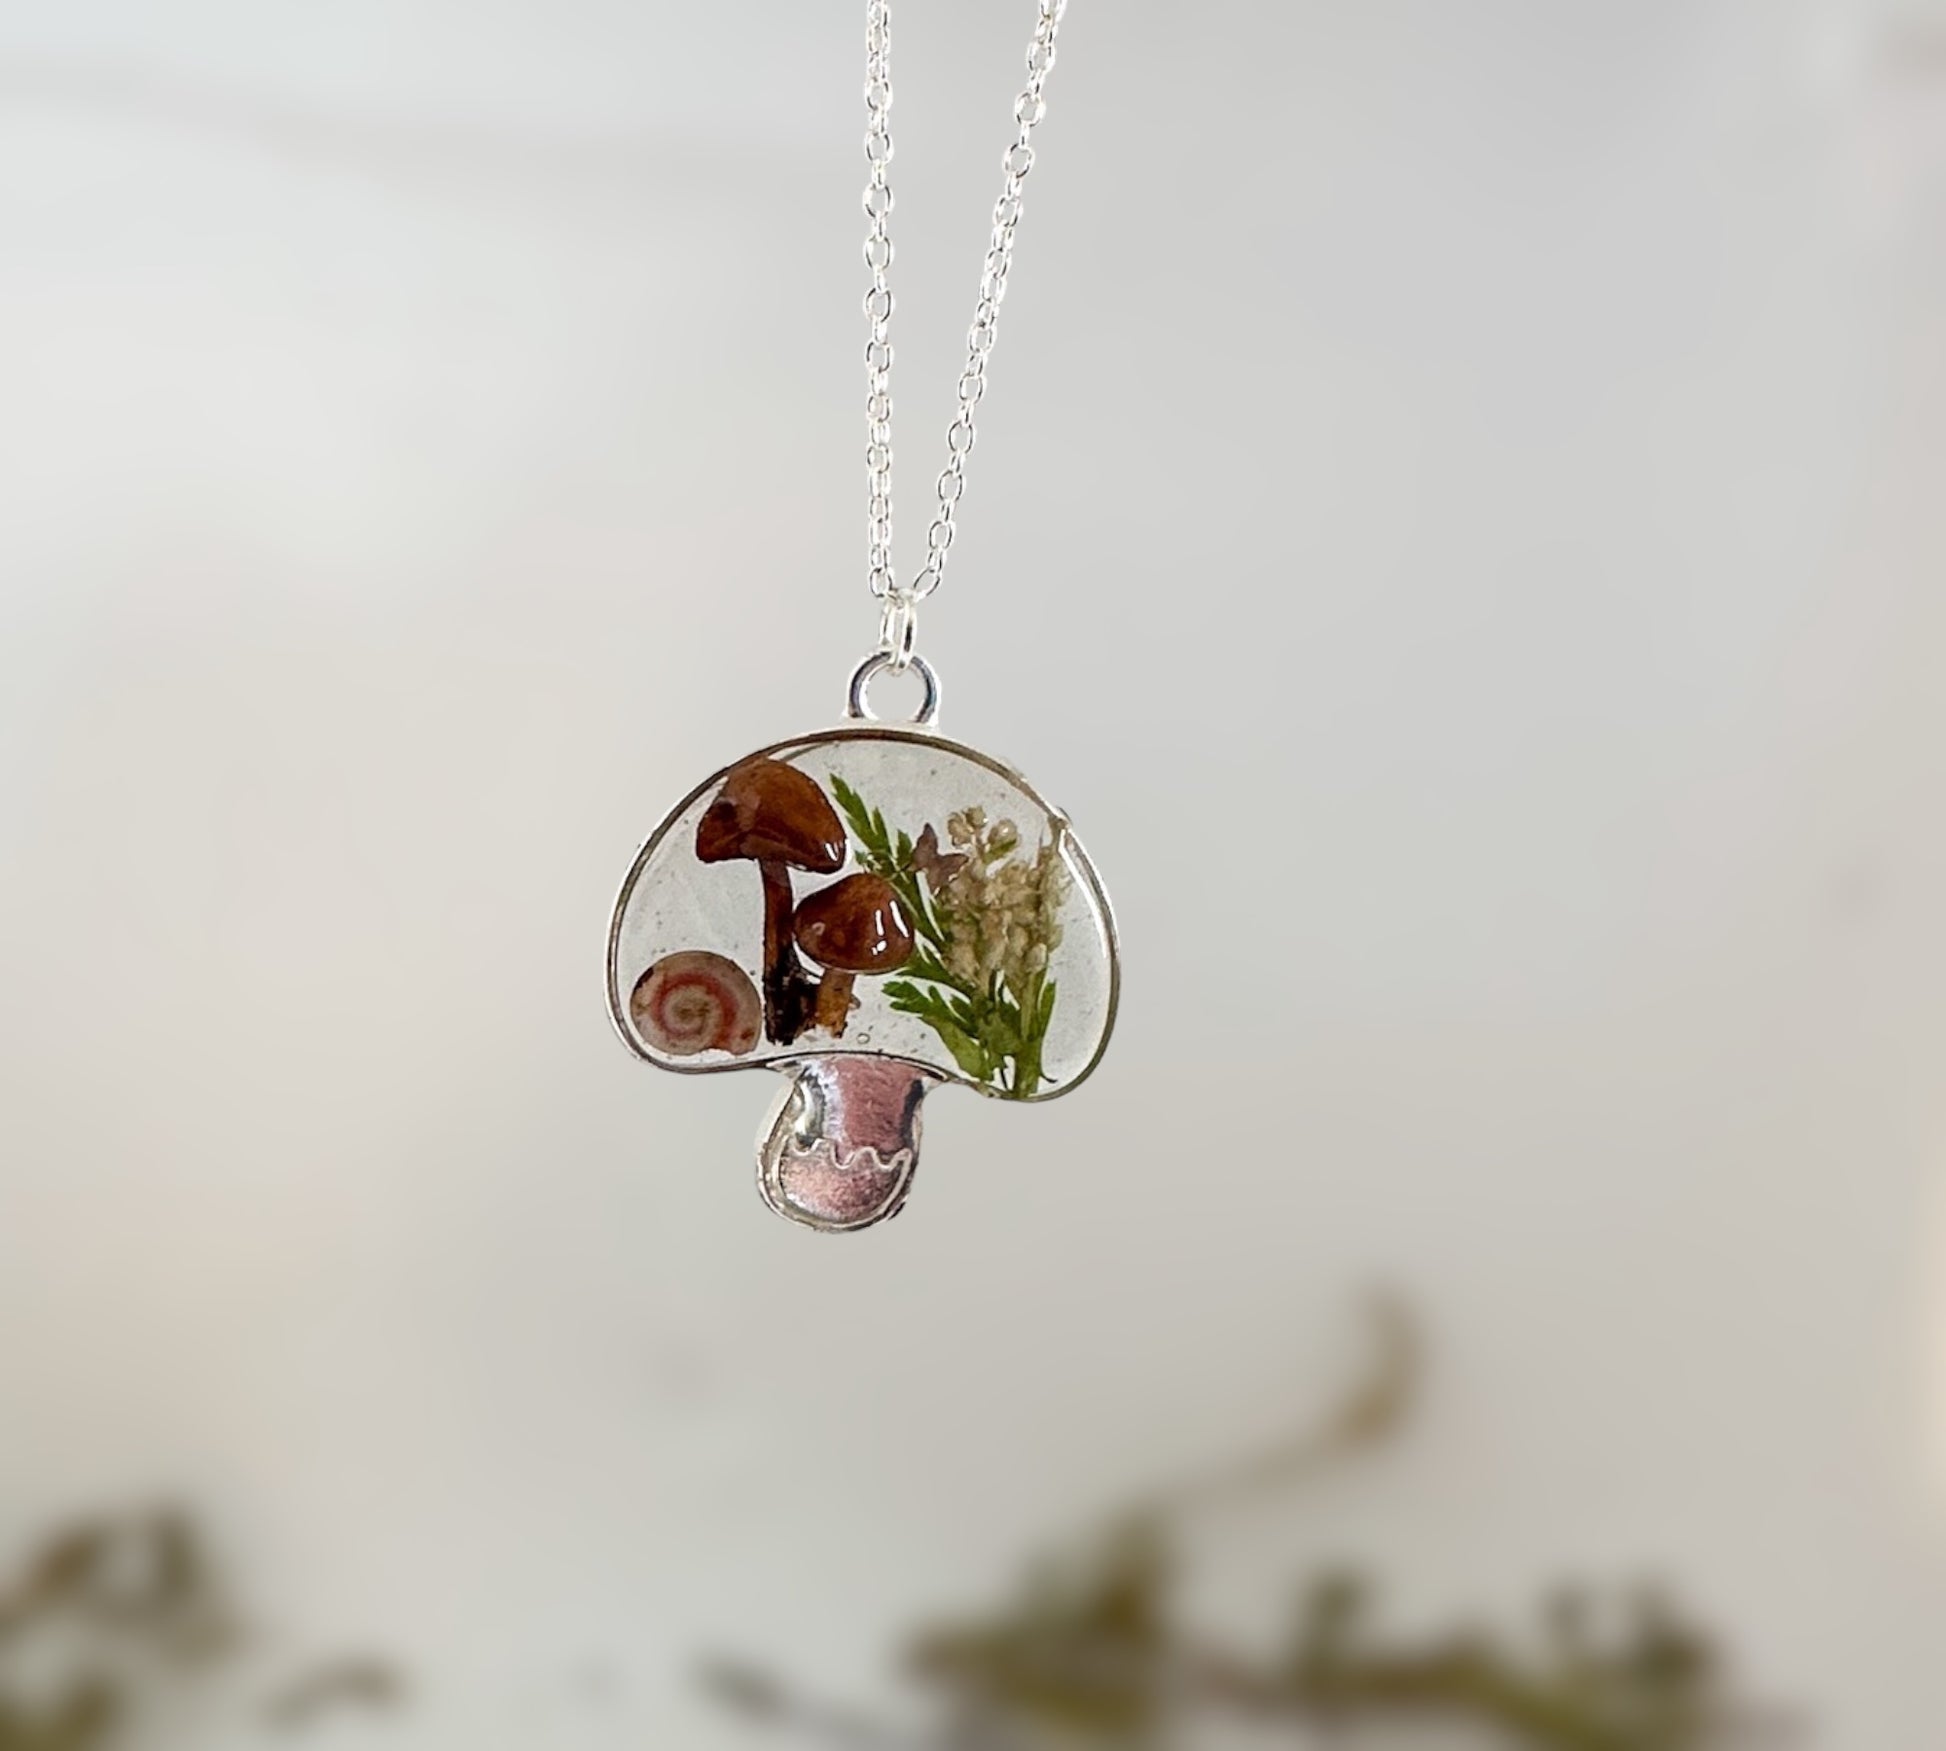 Magical Mushroom Pendant: Enchanting Forest Jewelry for Nature Lovers